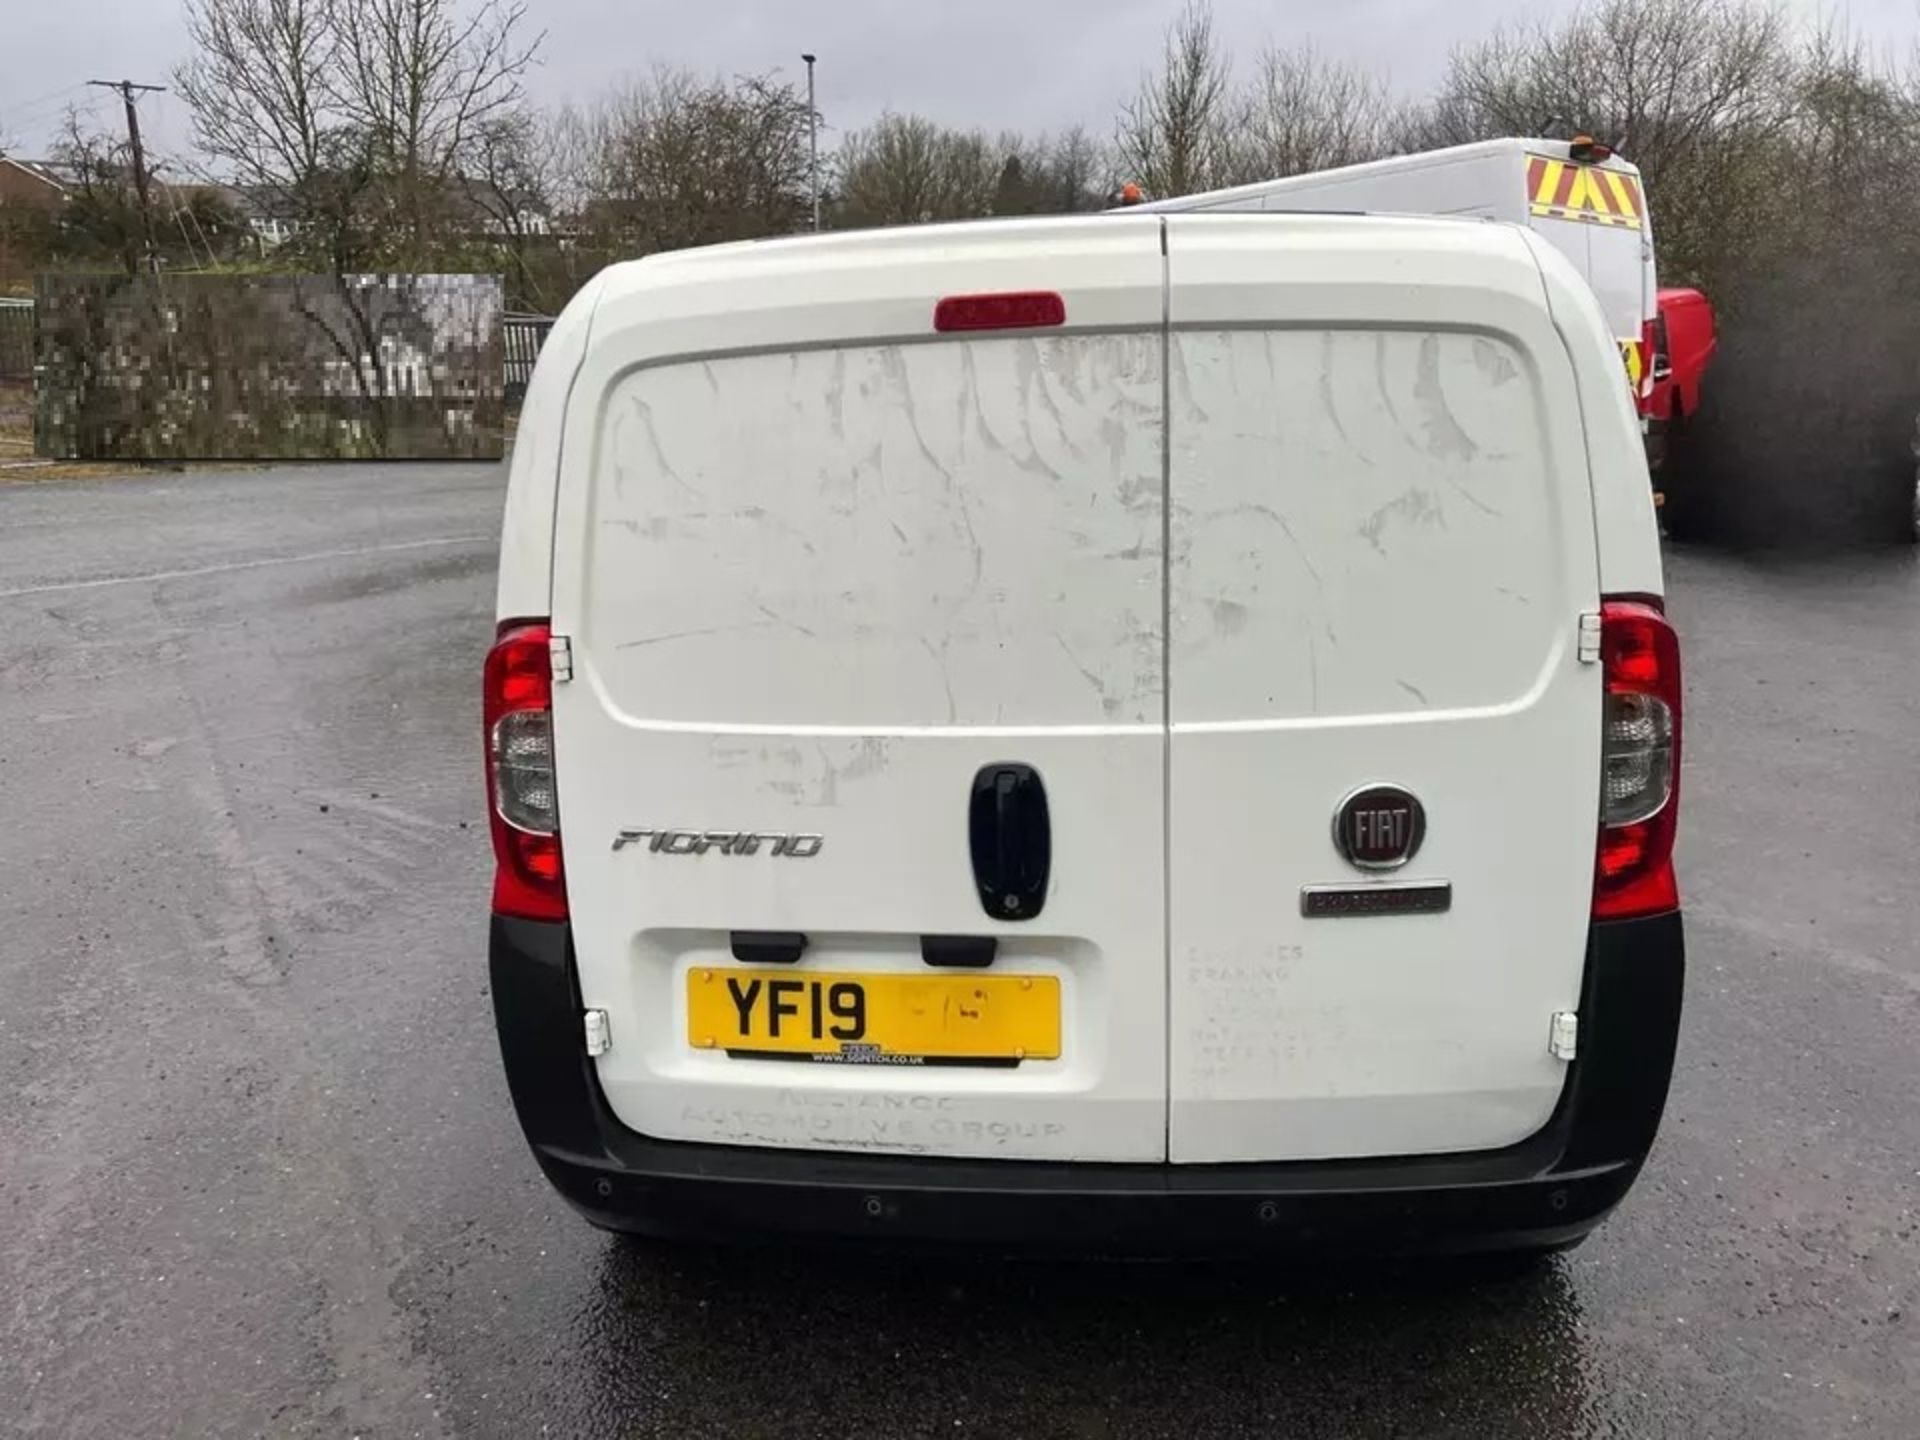 FIAT FIORINO SX 1.3 HDI VAN 2019 - LOADED WITH FEATURES, SOLD FOR SPARES OR REPAIRS - Image 5 of 12